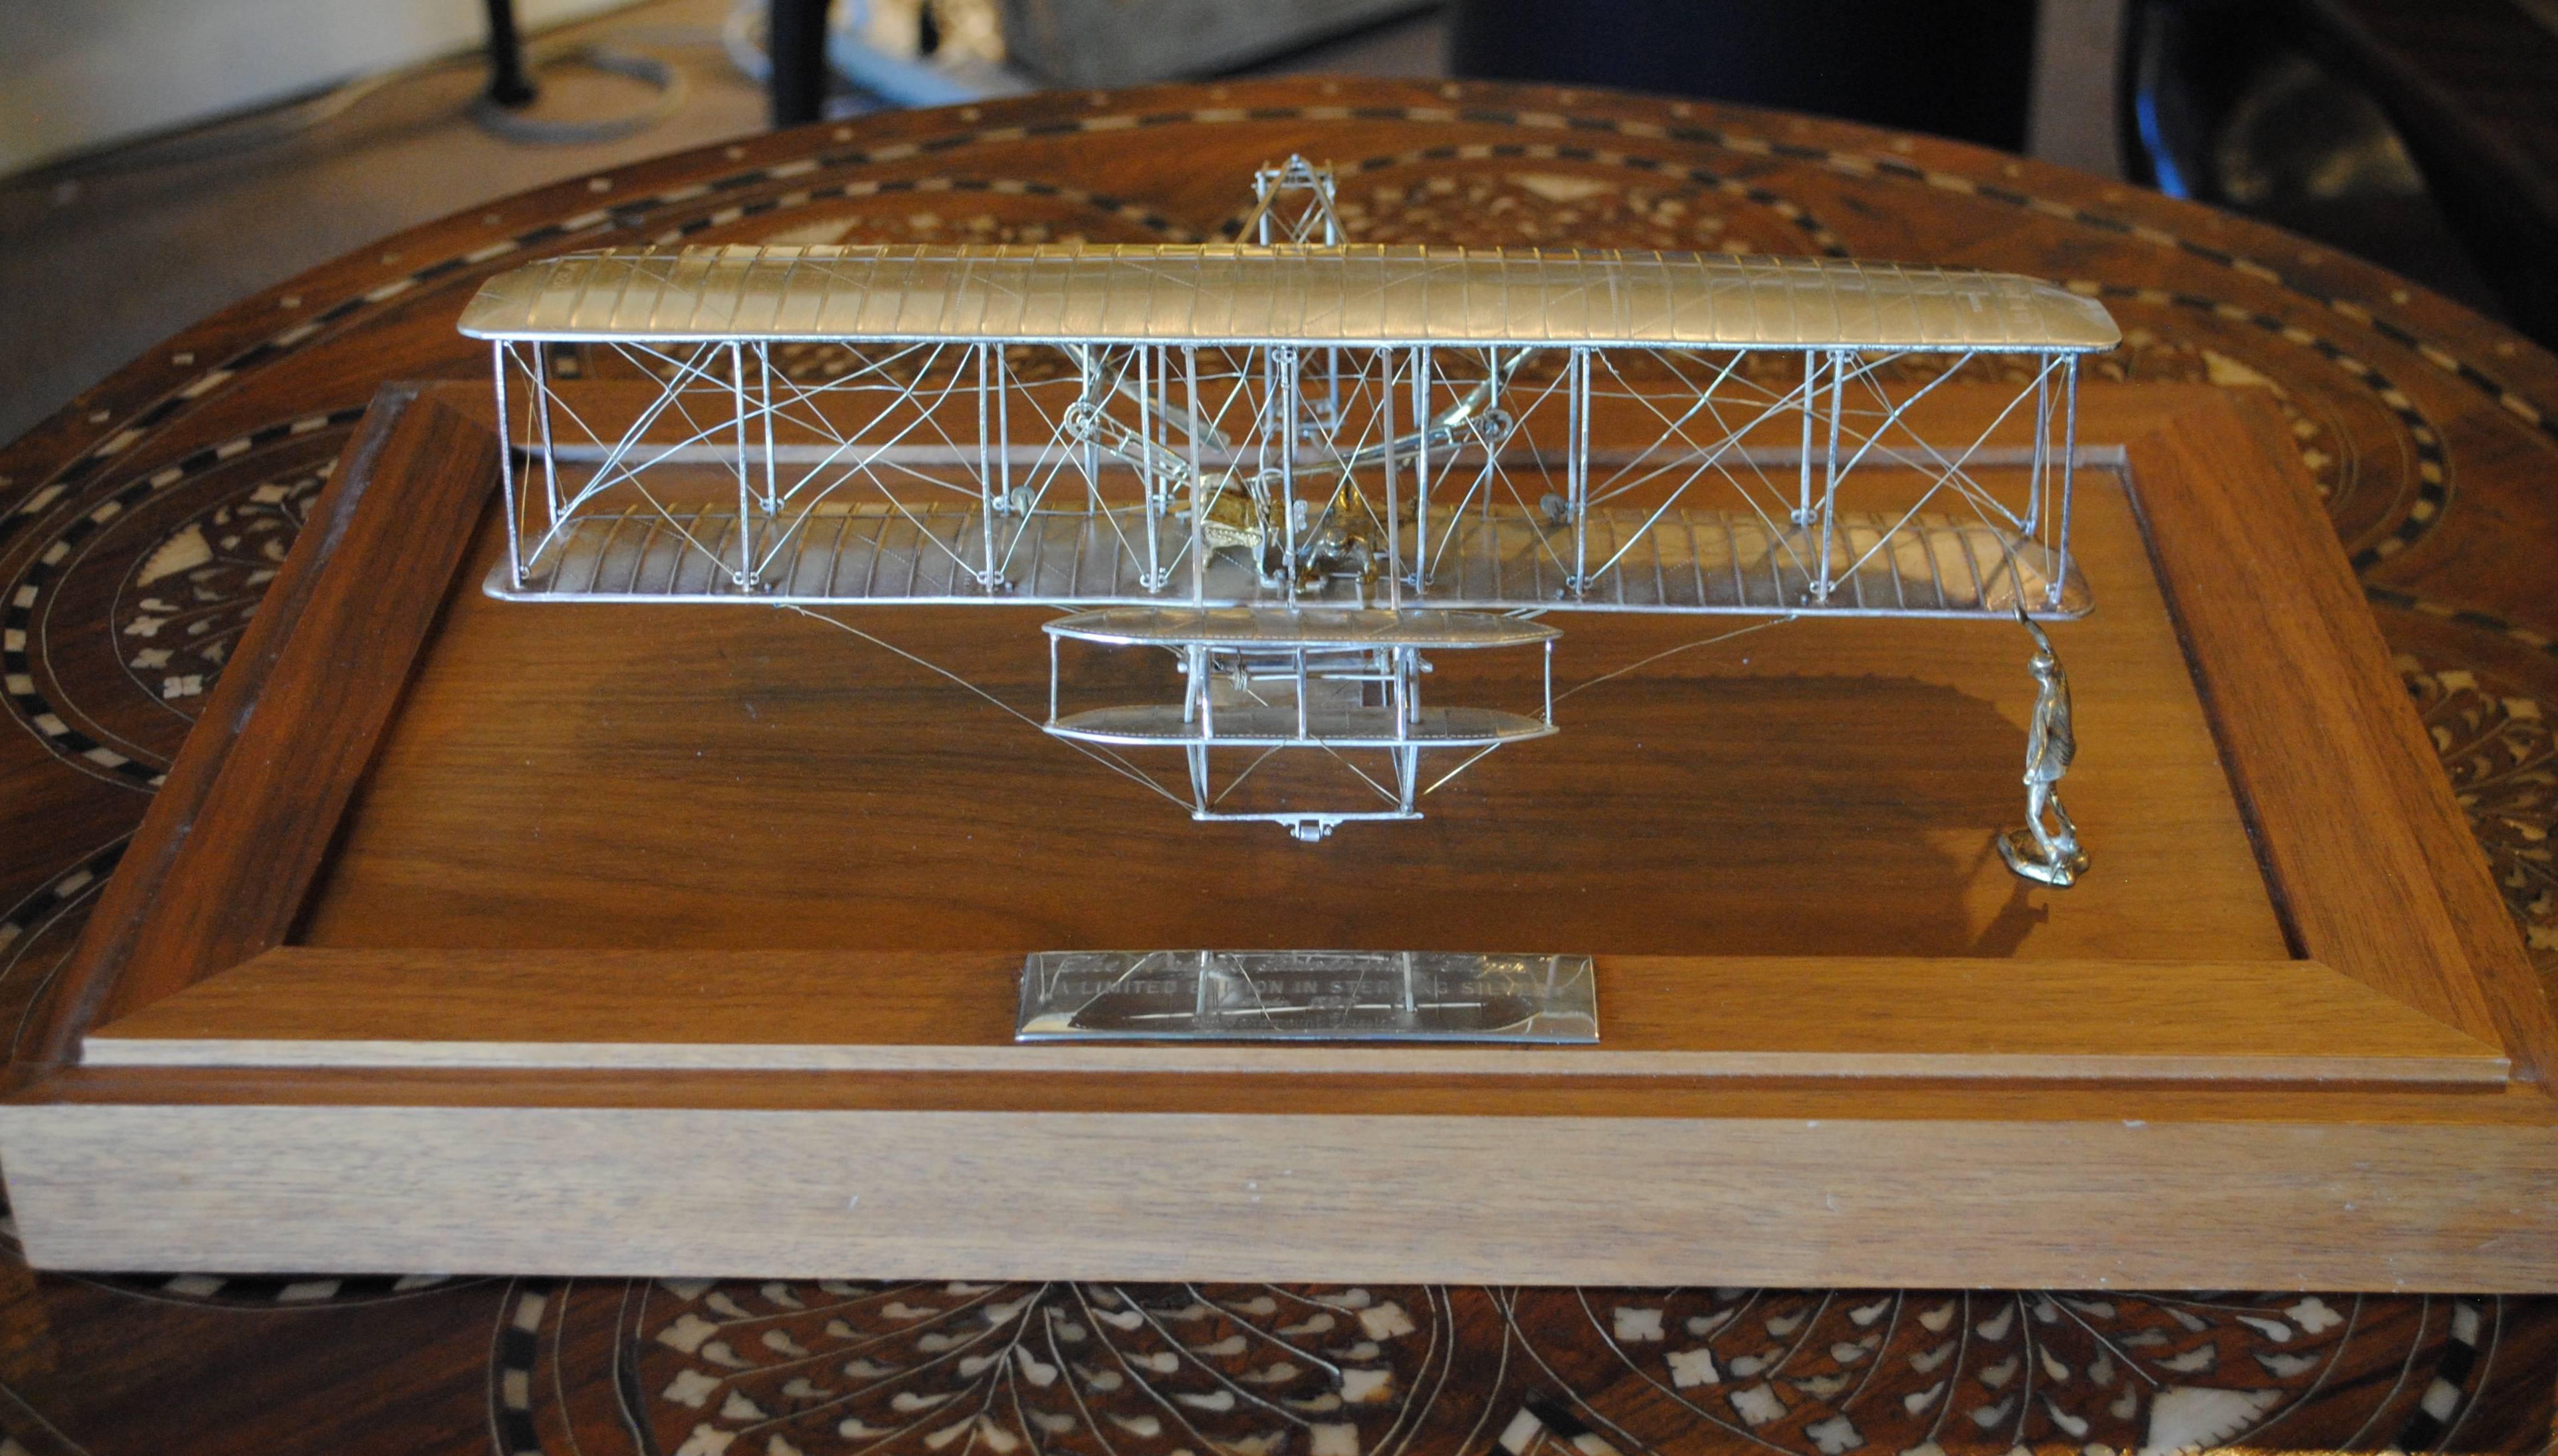 This is a scale model of the famous Wright Flyer, which made the first powered flight at Kitty Hawk in 1903. It is detailed and meticulously recreated in sterling silver. 526 of 1000 edition by Paramount Classics. Dimensions of flyer: 12.5